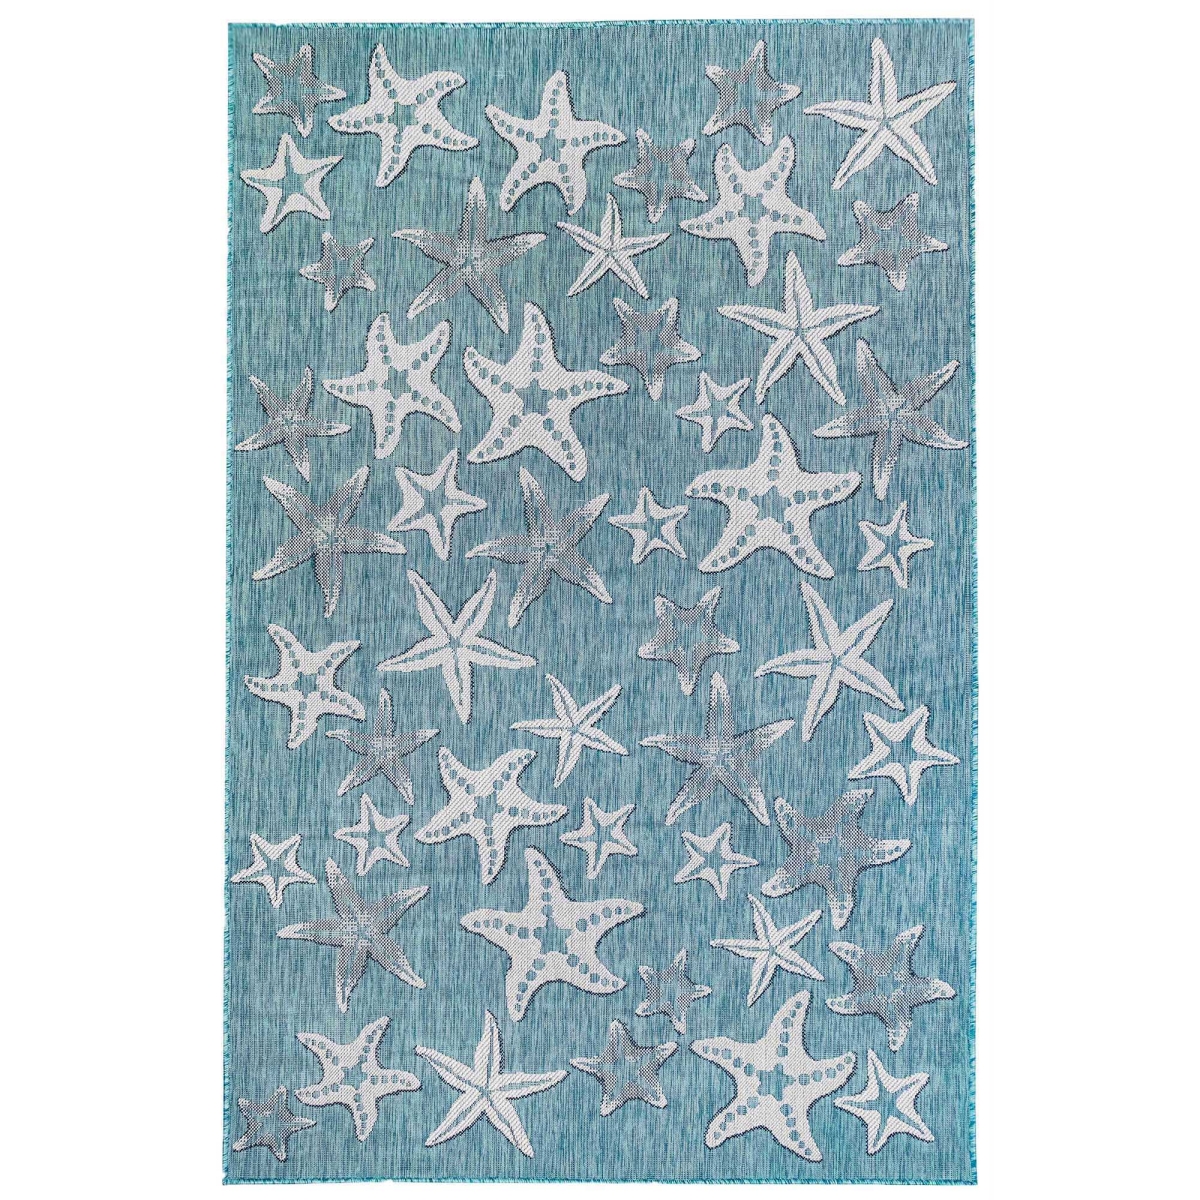 Trans-ocean Imports Cre58841504 4 Ft. 10 In. X 7 Ft. 6 In. Liora Manne Carmel Starfish Indoor & Outdoor Wilton Woven Rectangle Rug - Aqua